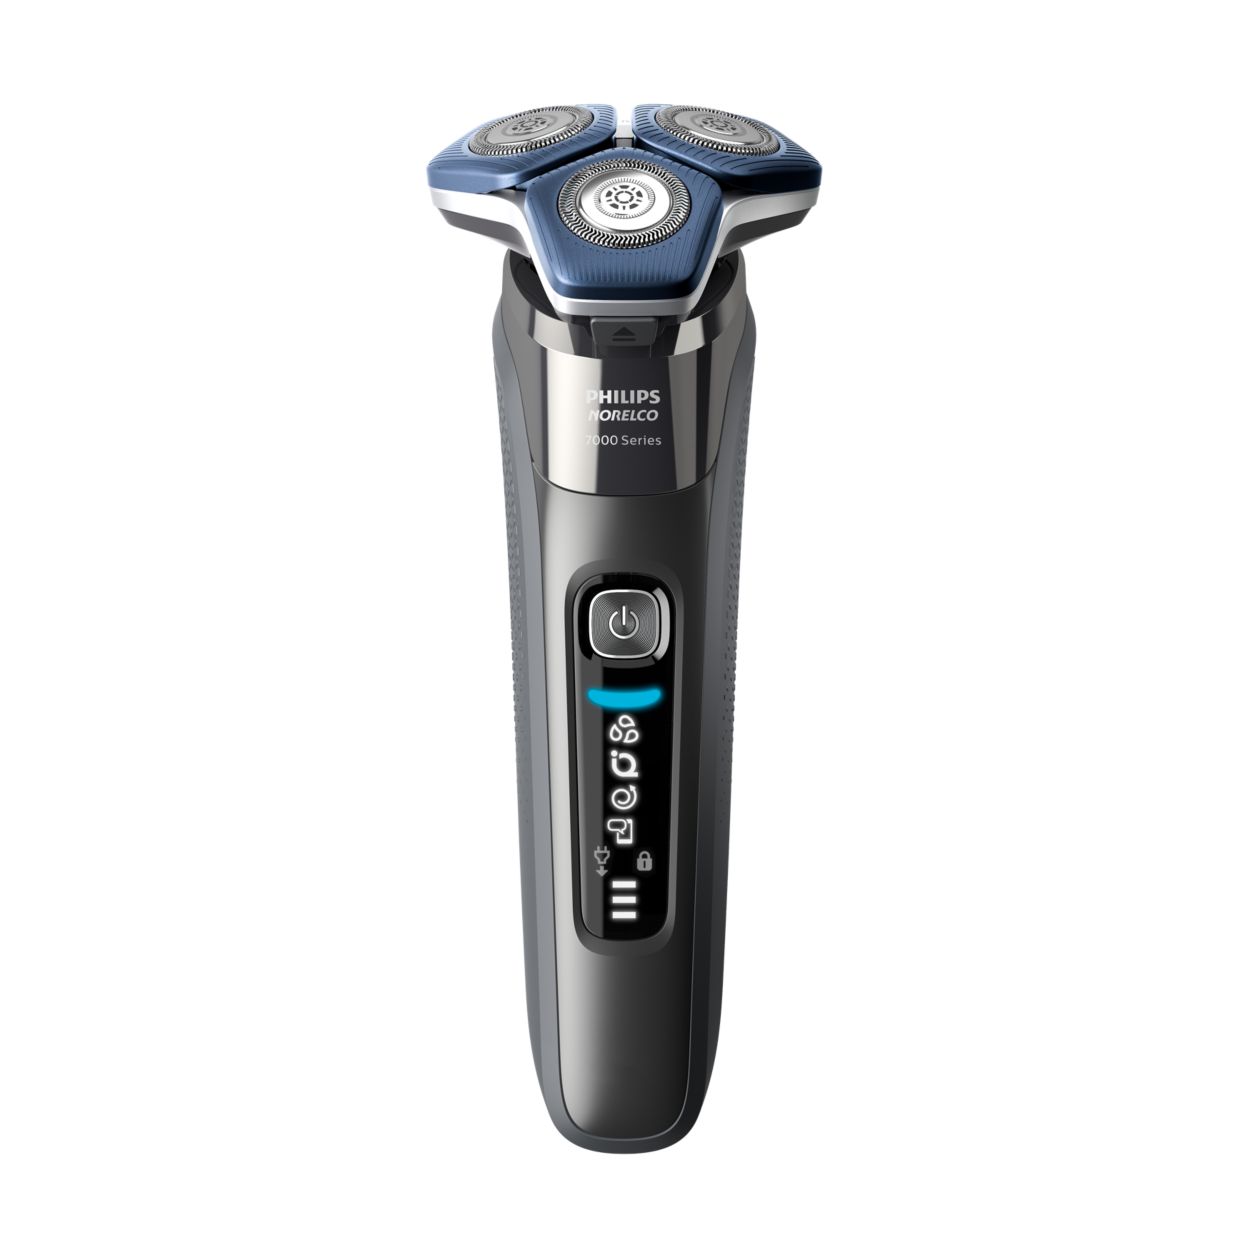 Shaver 7000 & Dry shaver S7887/82 | Norelco